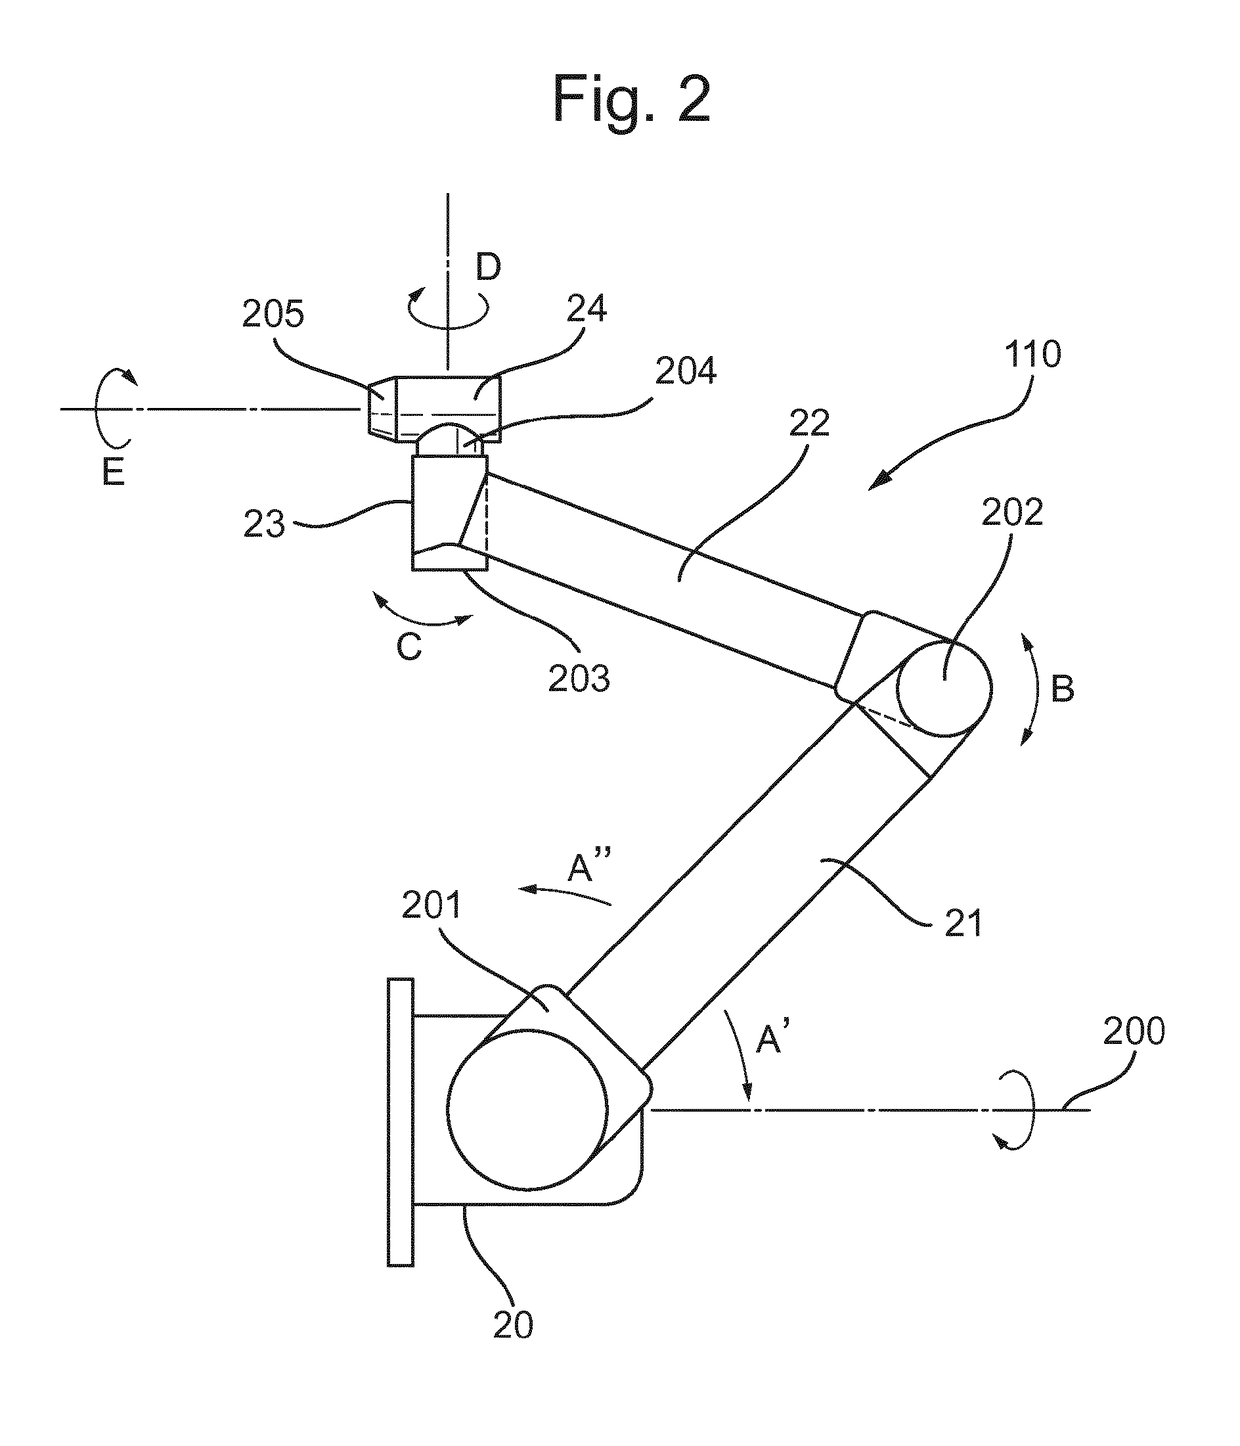 Mobile robotic drilling apparatus and method for drilling ceilings and walls